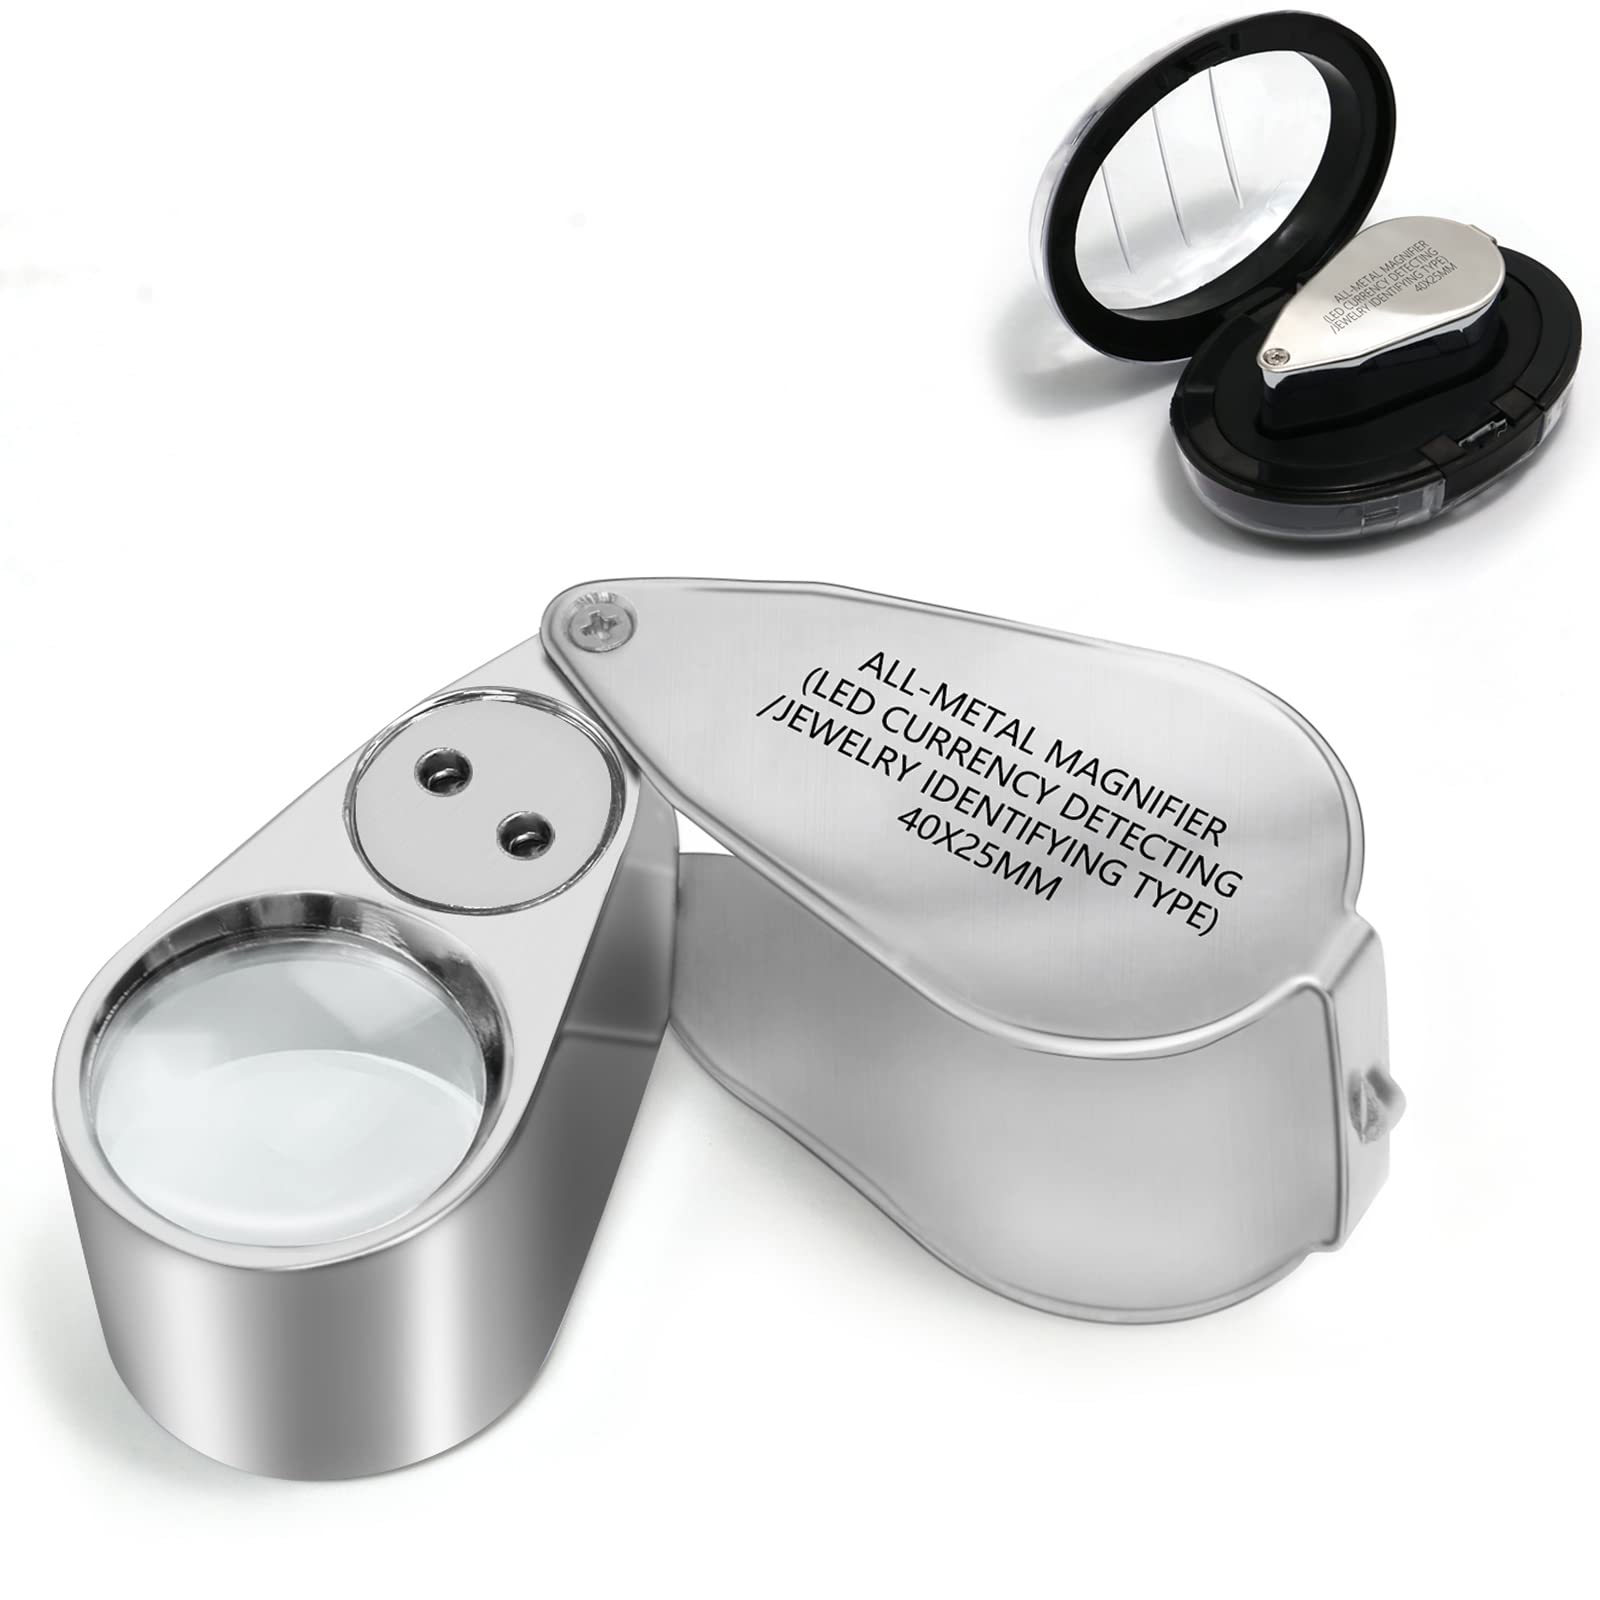 High Quality 10X Optical glass Magnifier Lighted Jeweler loupe w/ Meas 